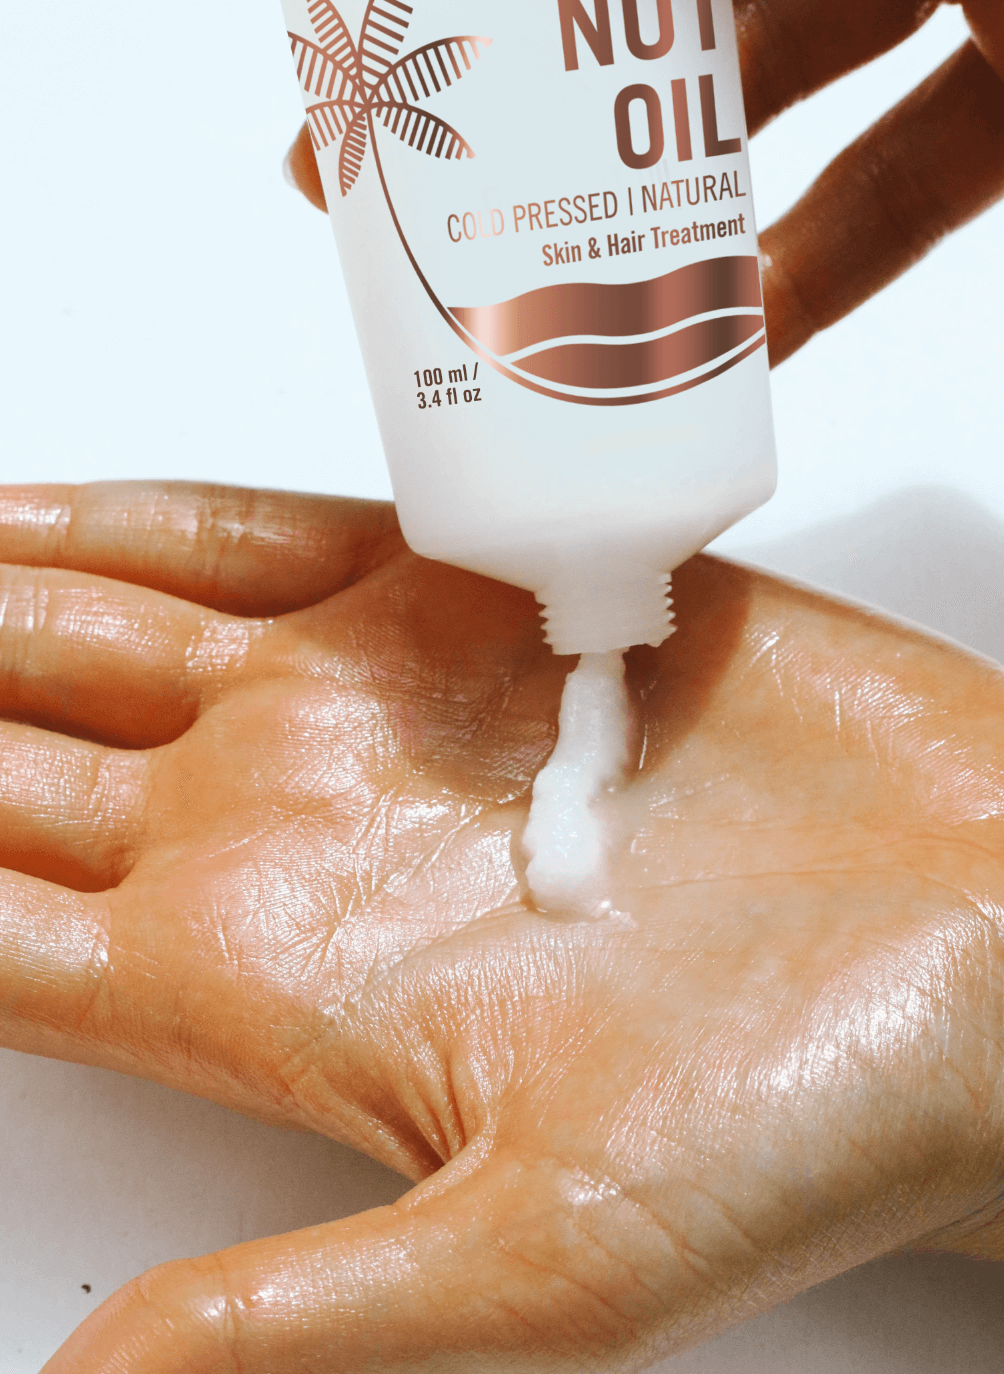 A person's hand with a small amount of coconut oil being dispensed from a bottle labeled "coconut oil. cold pressed natural skin & hair treatment.